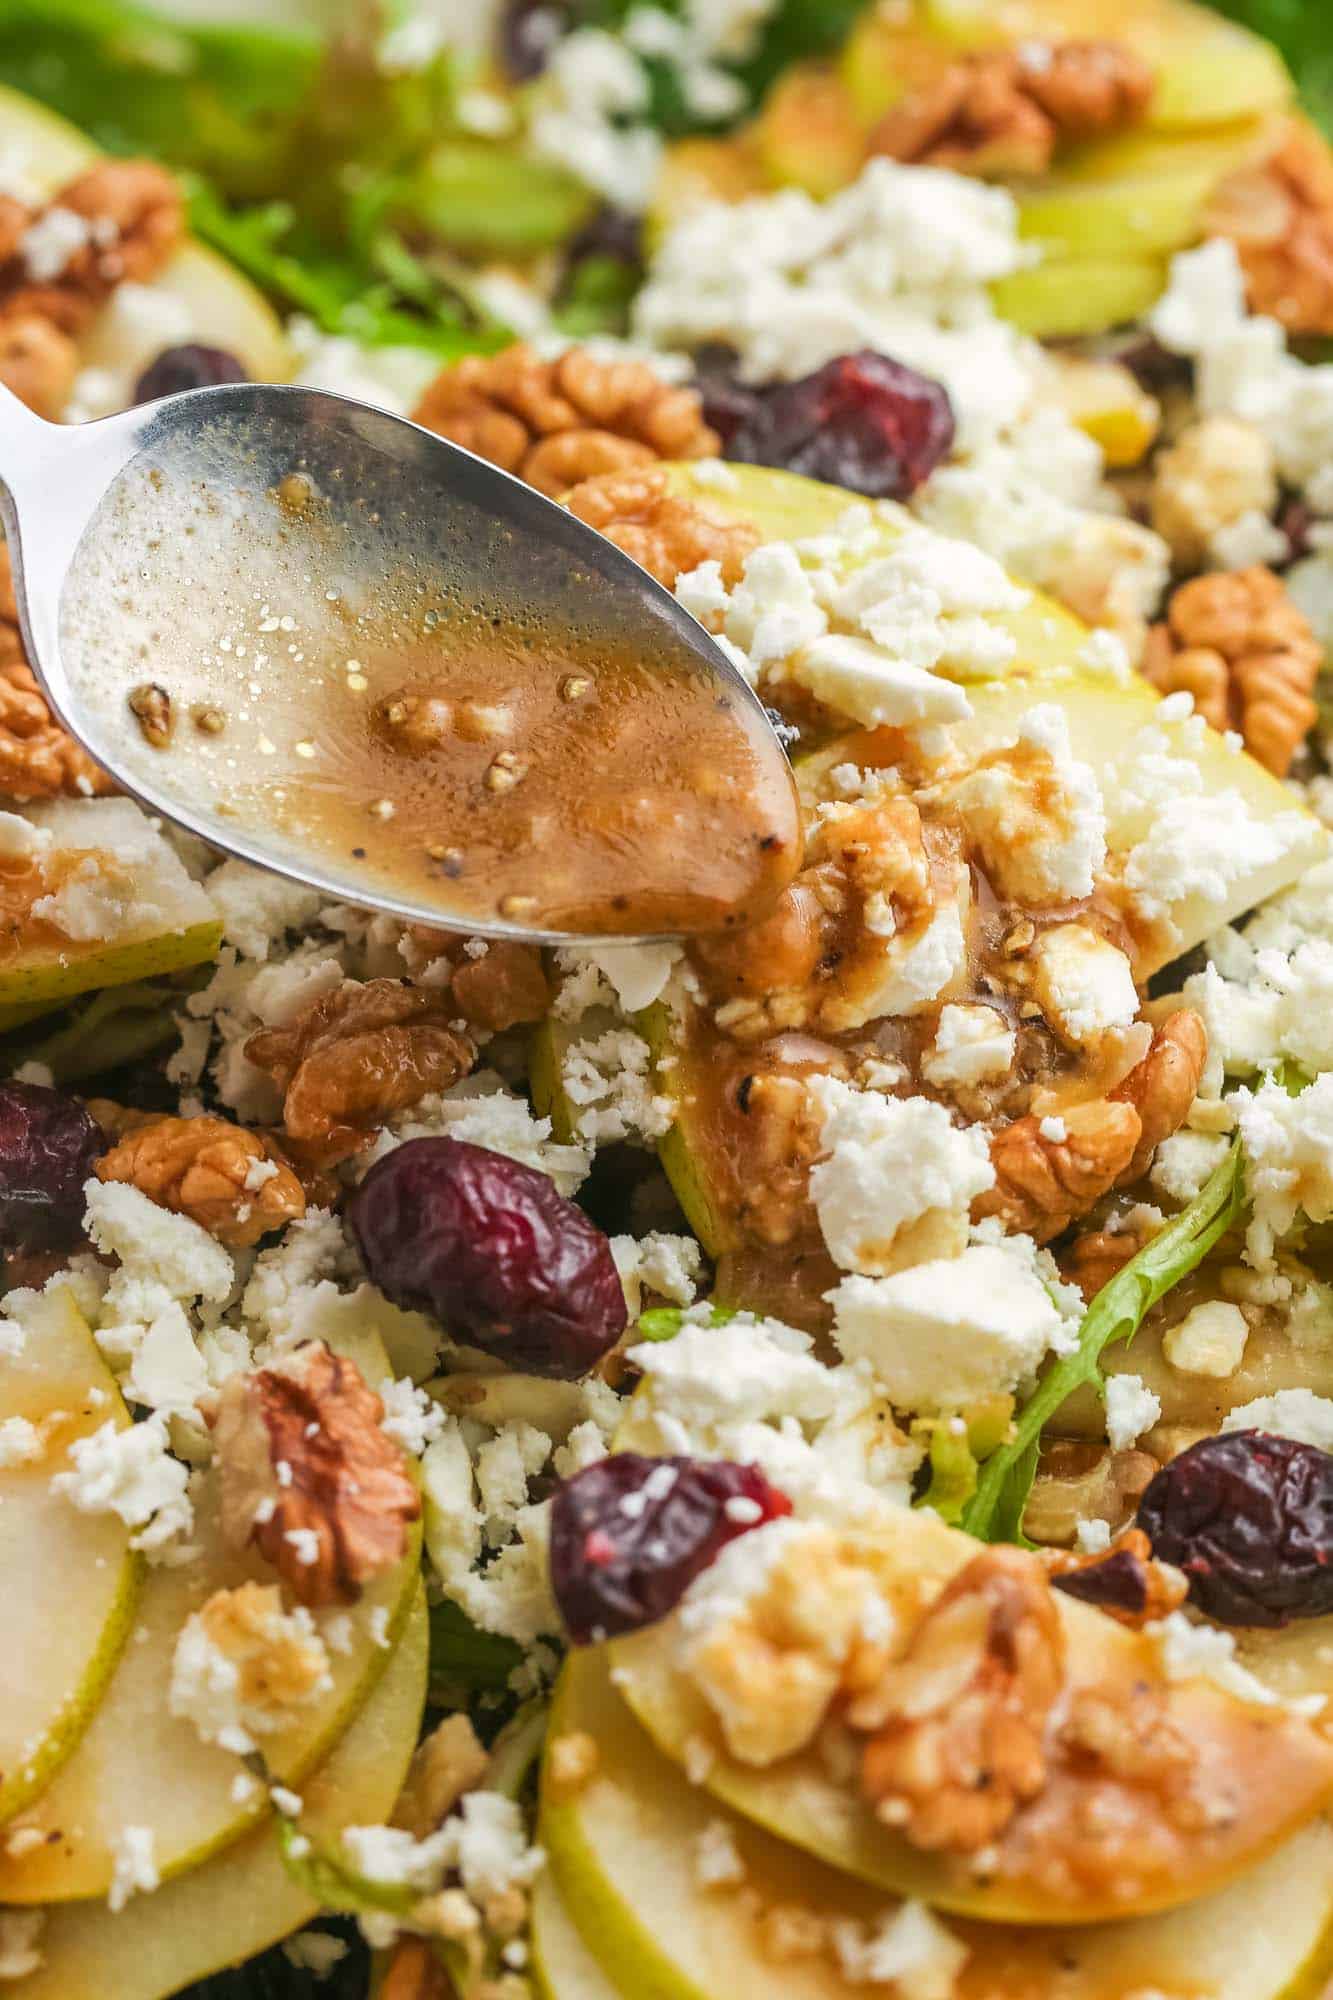 closeup view of a salad topped with sliced pears, cheese, and nuts. A spoon is pouring dressing over the salad.